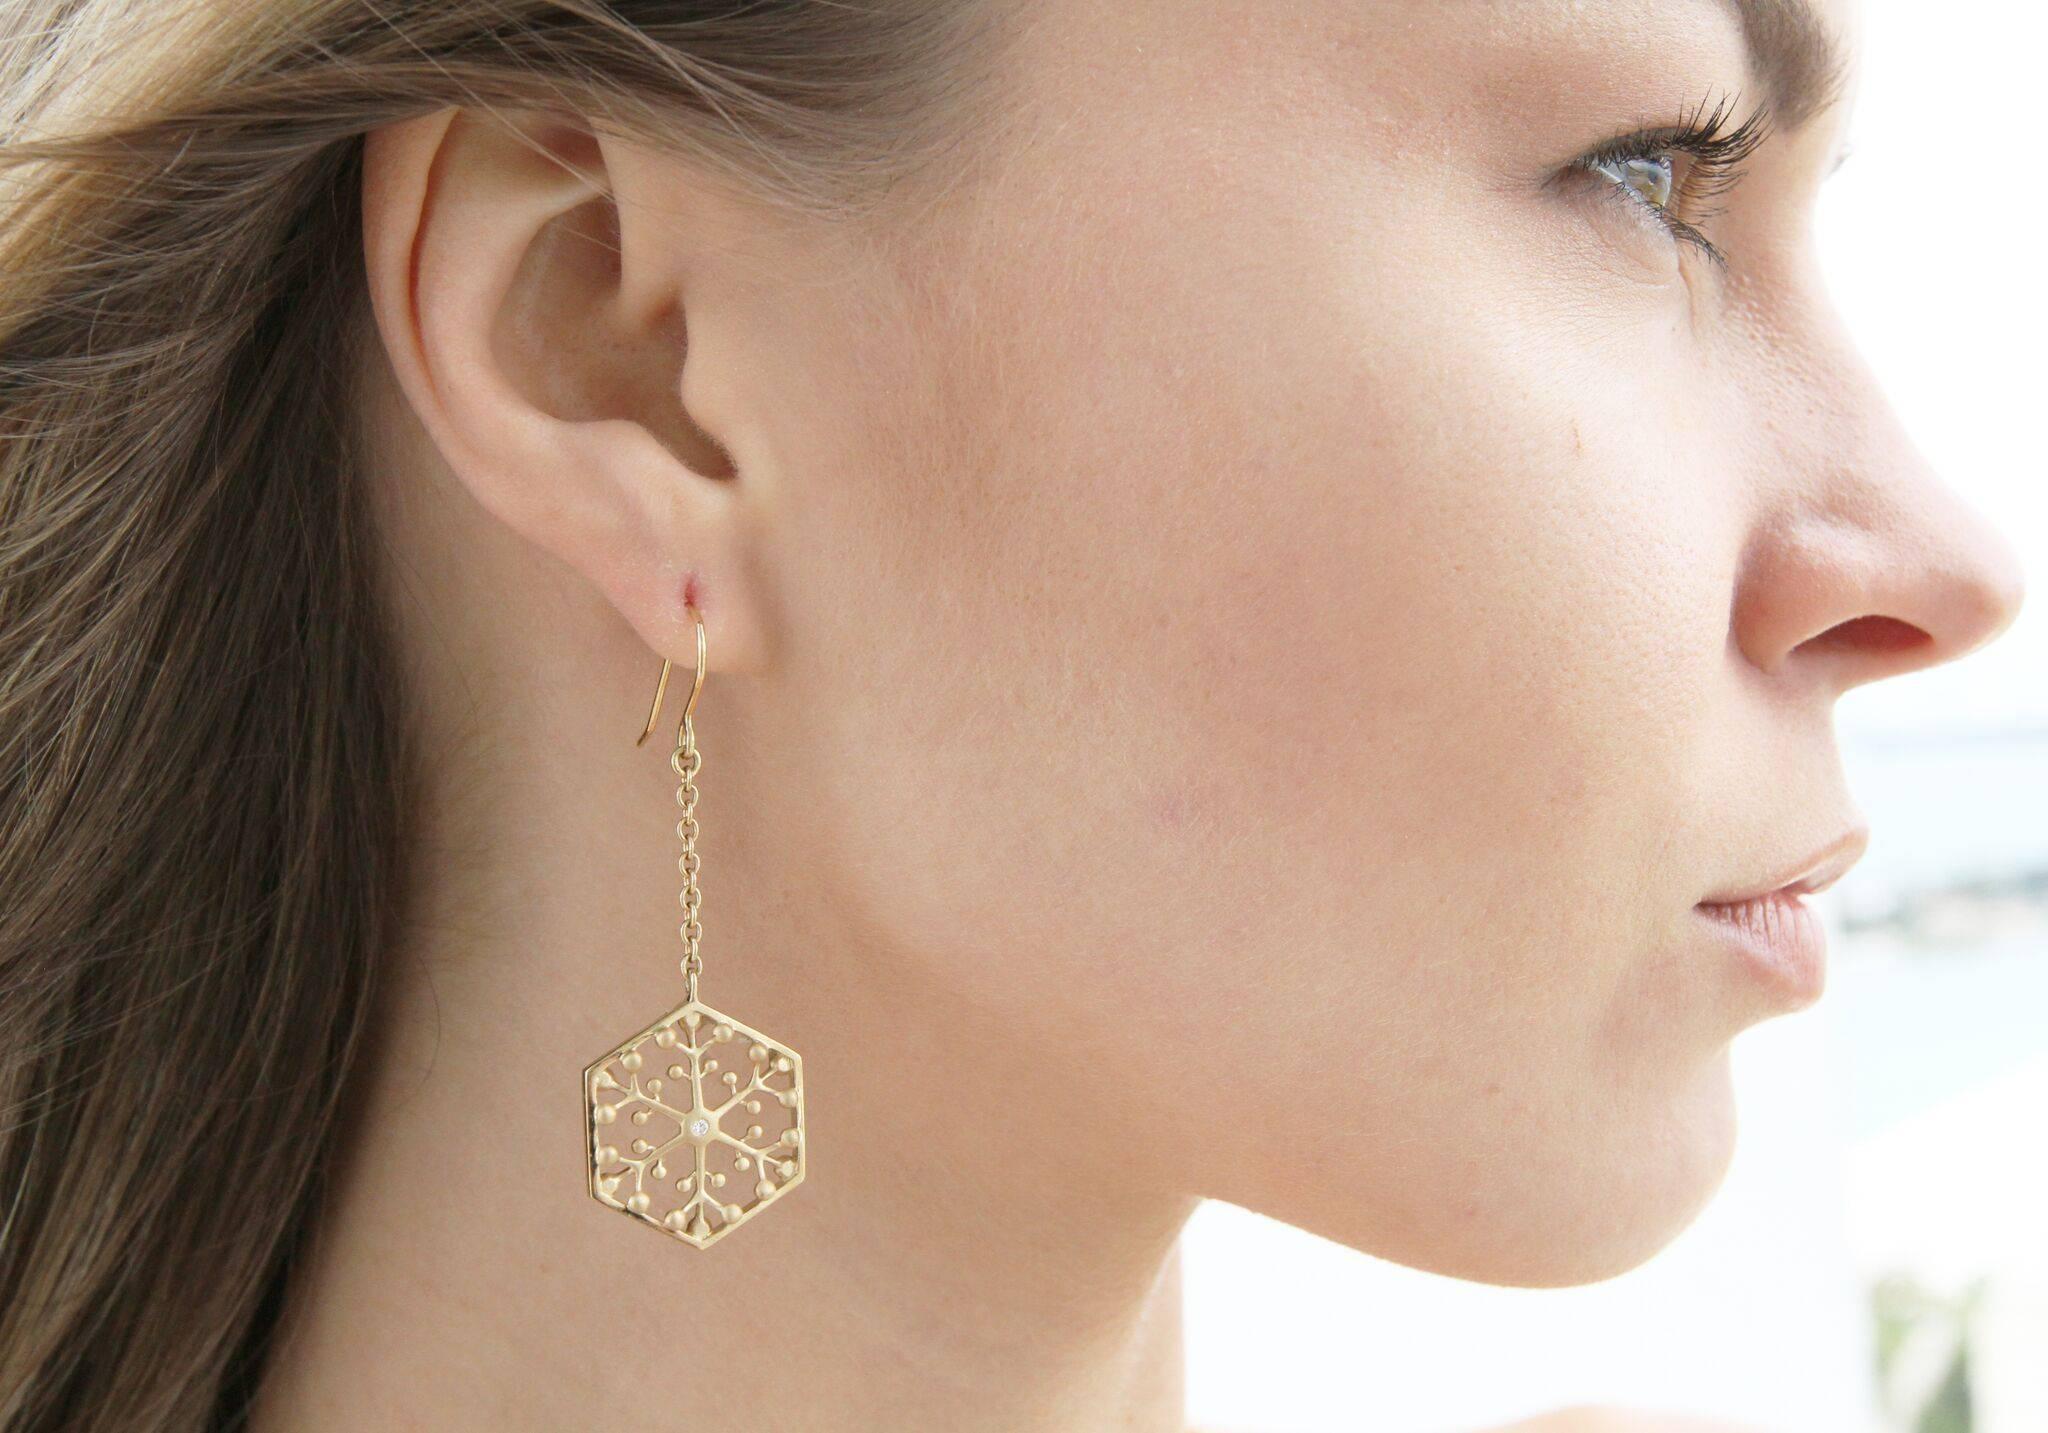 This limited edition, Snowflakes Independence 18K Gold Drop Earrings sparkle with strength. The diamonds are meant to invoke power and clarity. These statement earrings represents exploding stars, with a sparkling diamond in the center. This piece